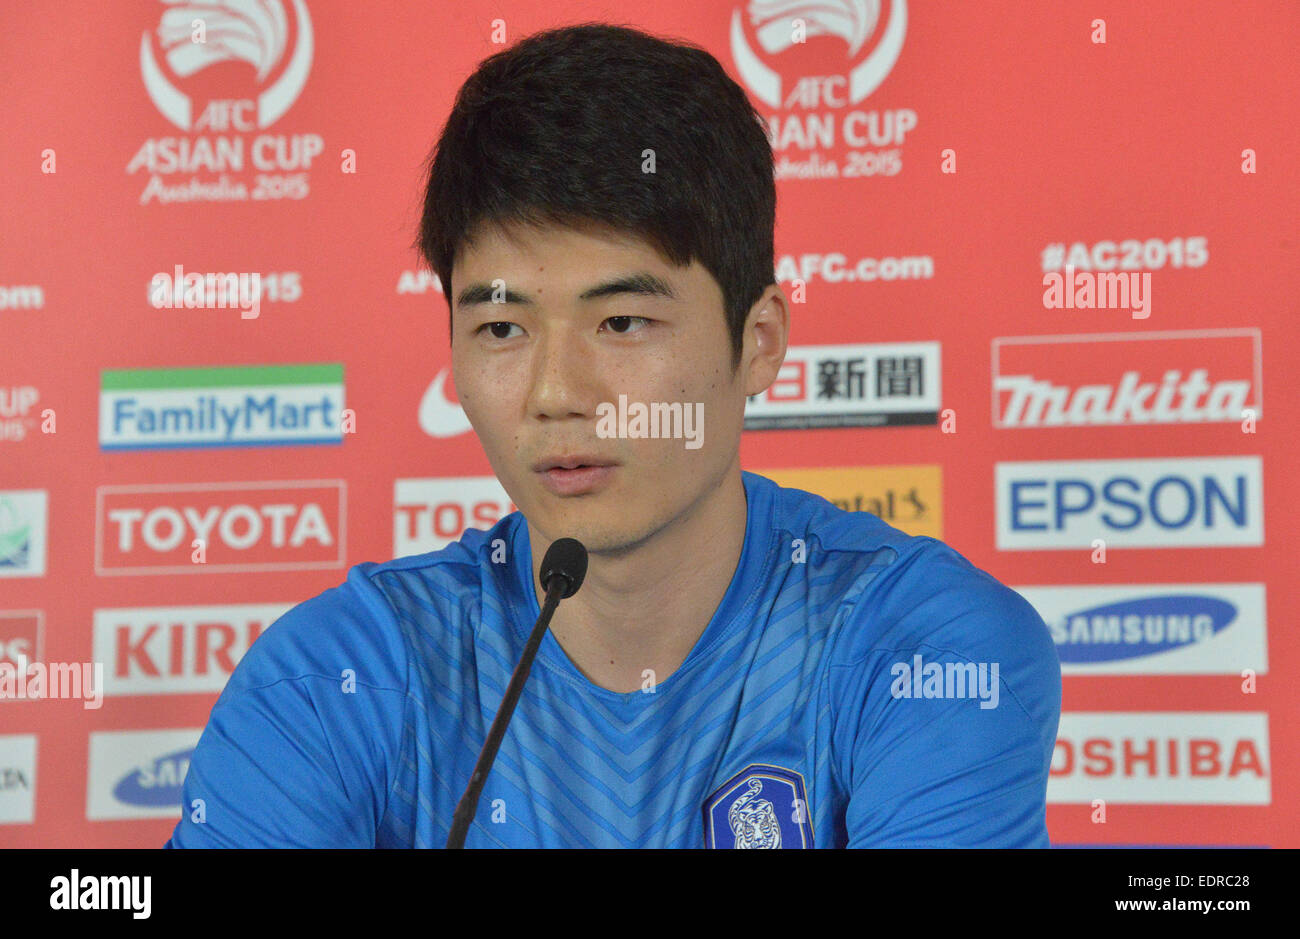 Canberra, Australia. 9th Jan, 2015. South Korean captain Ki Sung Yueng attends a press conference for AFC Asian Cup at the Canberra Stadium in Canberra, Australia, Jan. 9, 2015. South Korea will first play against Oman in Canberra on Jan. 10. © Justin Qian/Xinhua/Alamy Live News Stock Photo